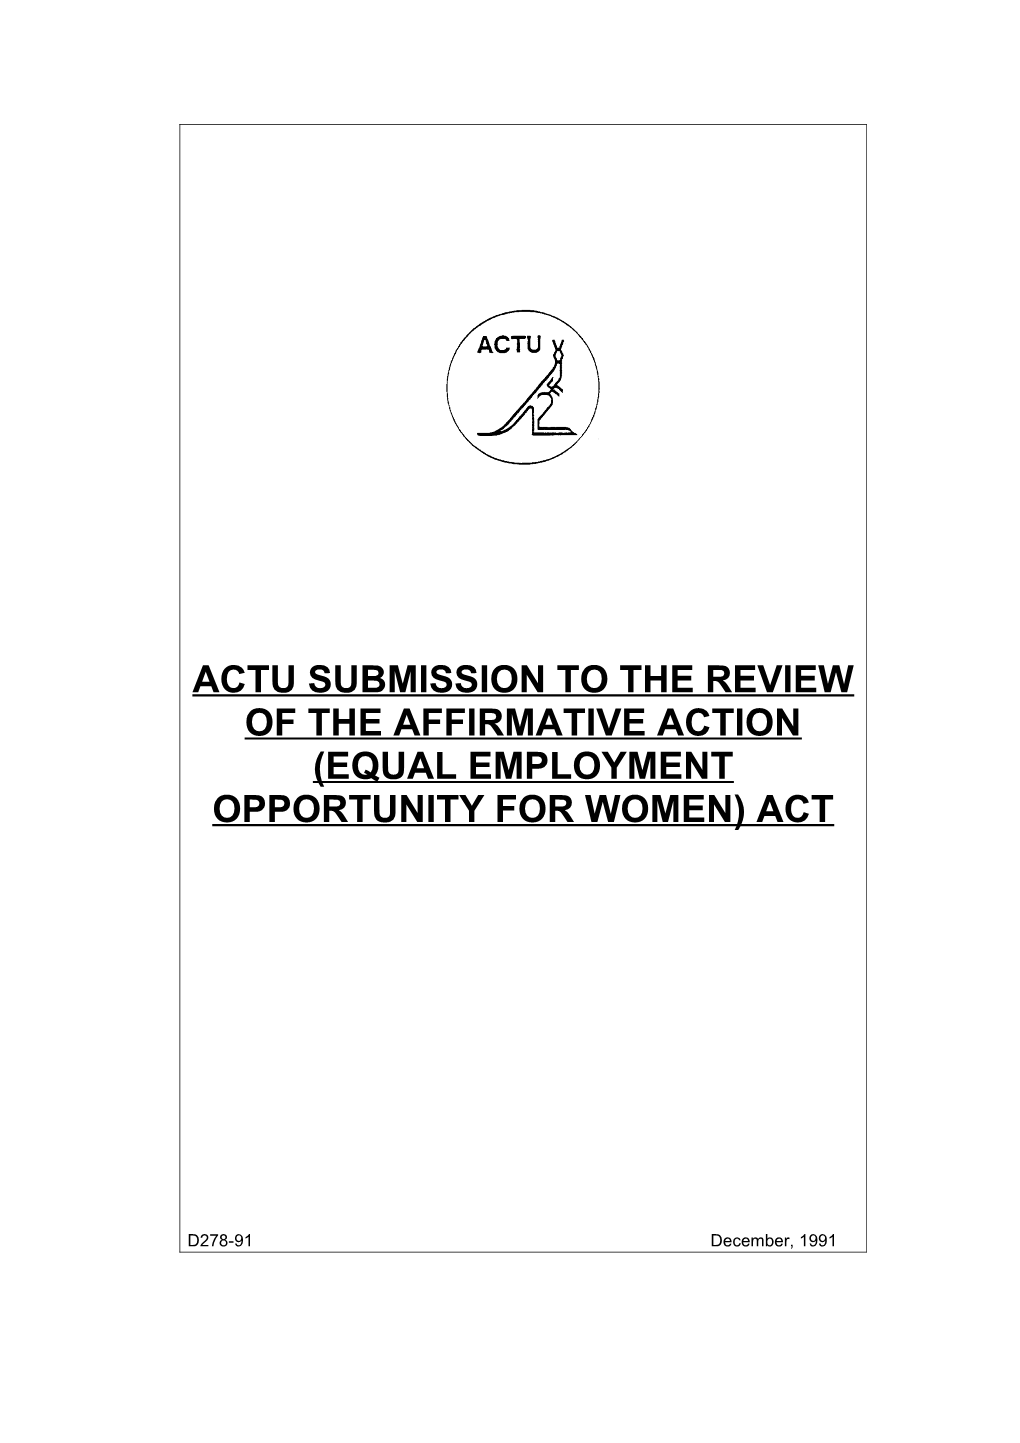 ACTU Submission to the Review of the Affirmative Action (Equal Employmetn Opportunity For